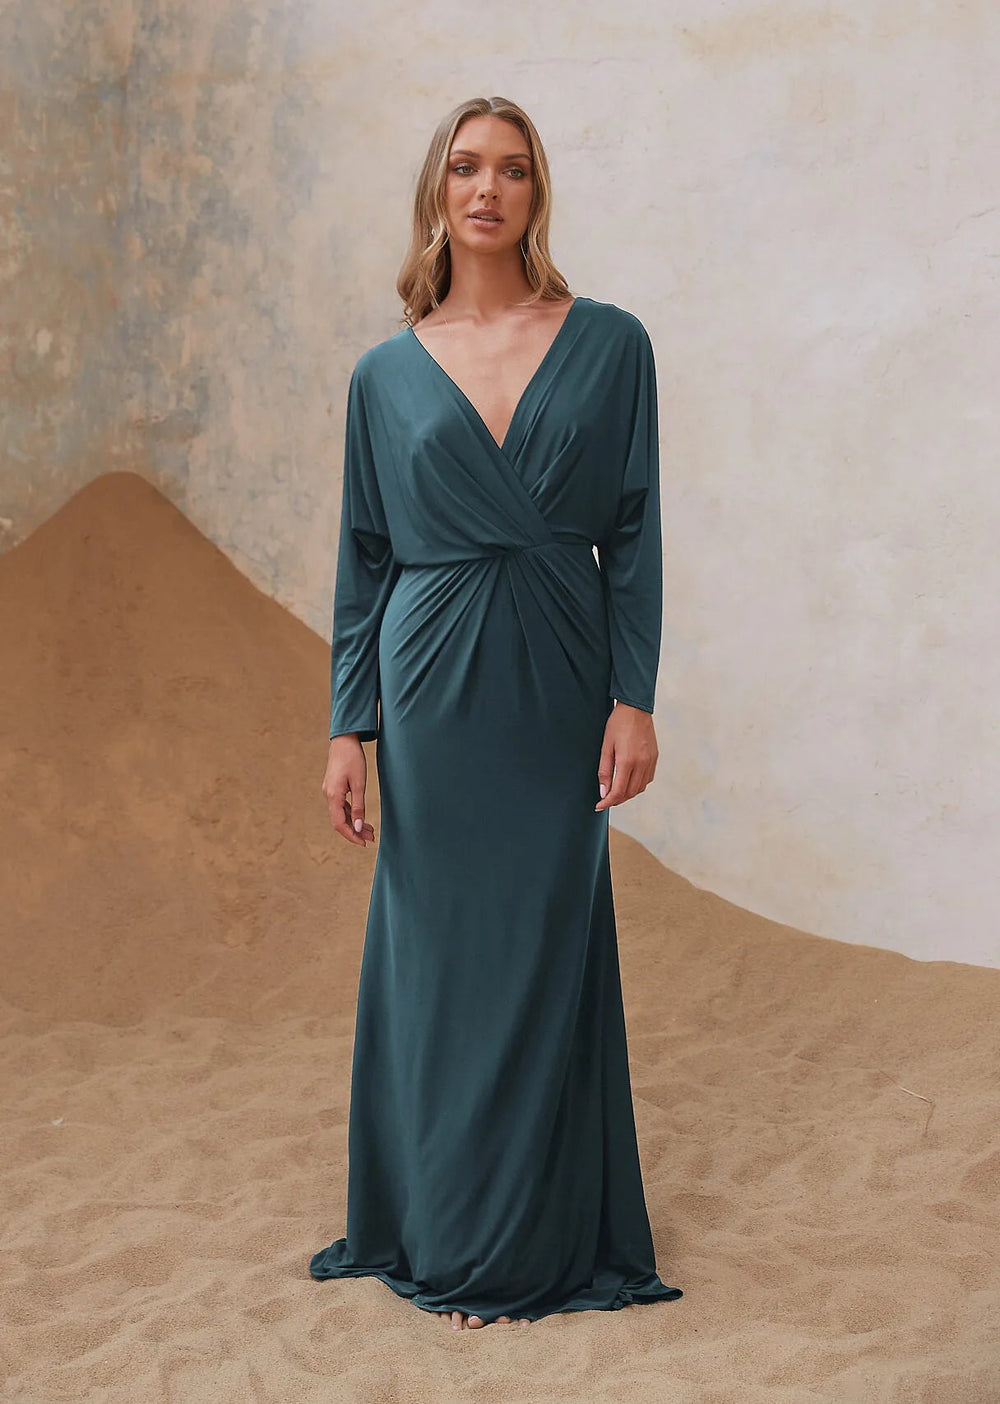 Adair Dress by Tania Olsen TO2436 - ElissaJay Boutique